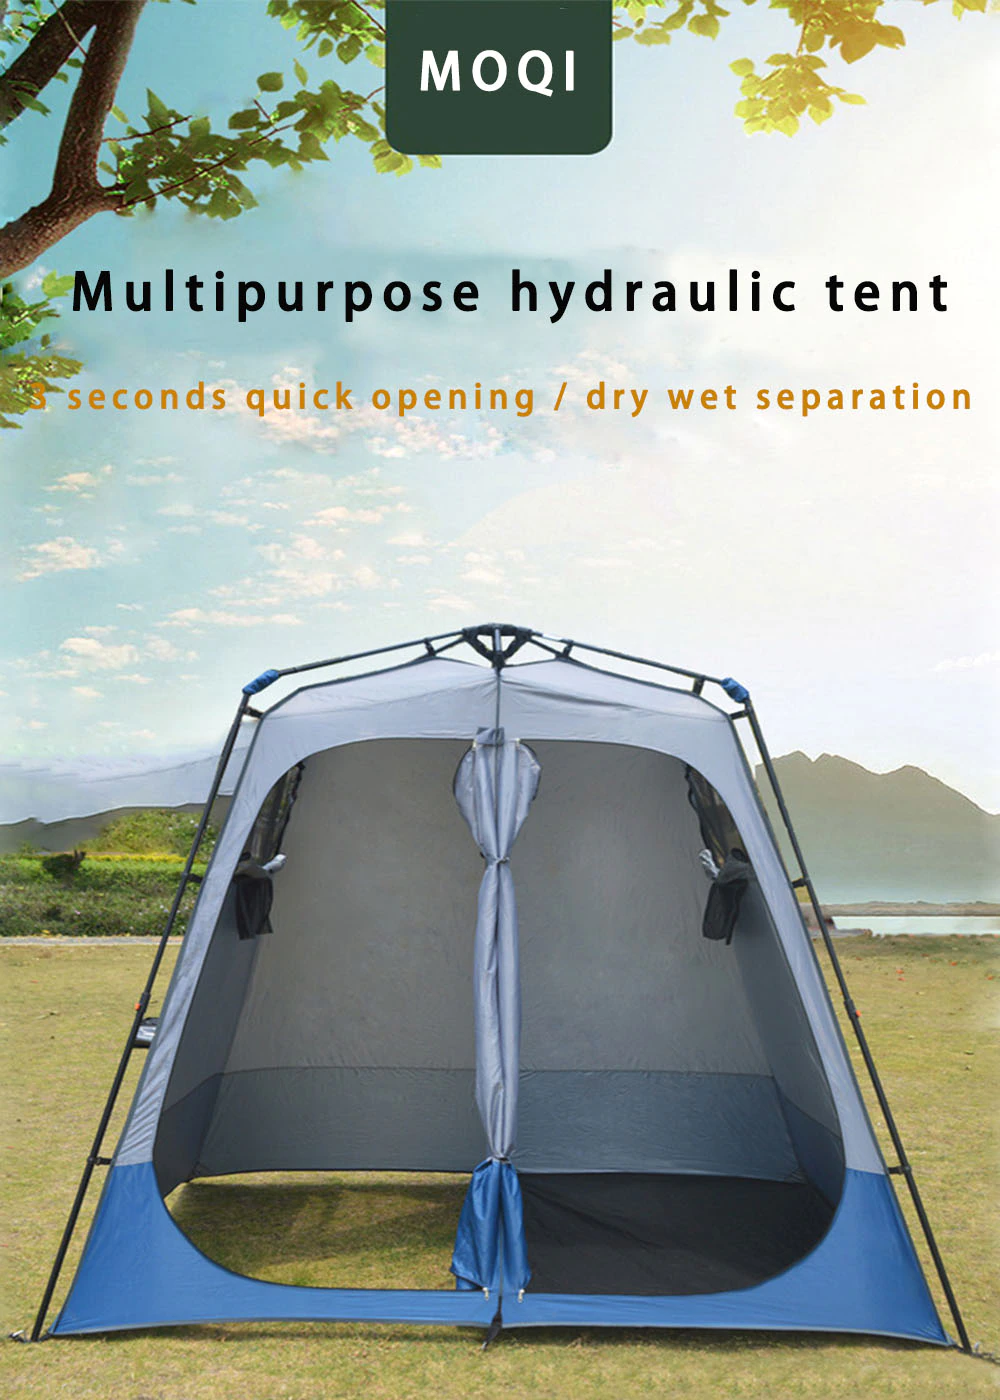 Cheap Goat Tents Outdoor Automat Shower Tent Changing Room Privacy Portable Camping Shelters 2 Rooms Instant Toilet Tent Bathing Tent Rain